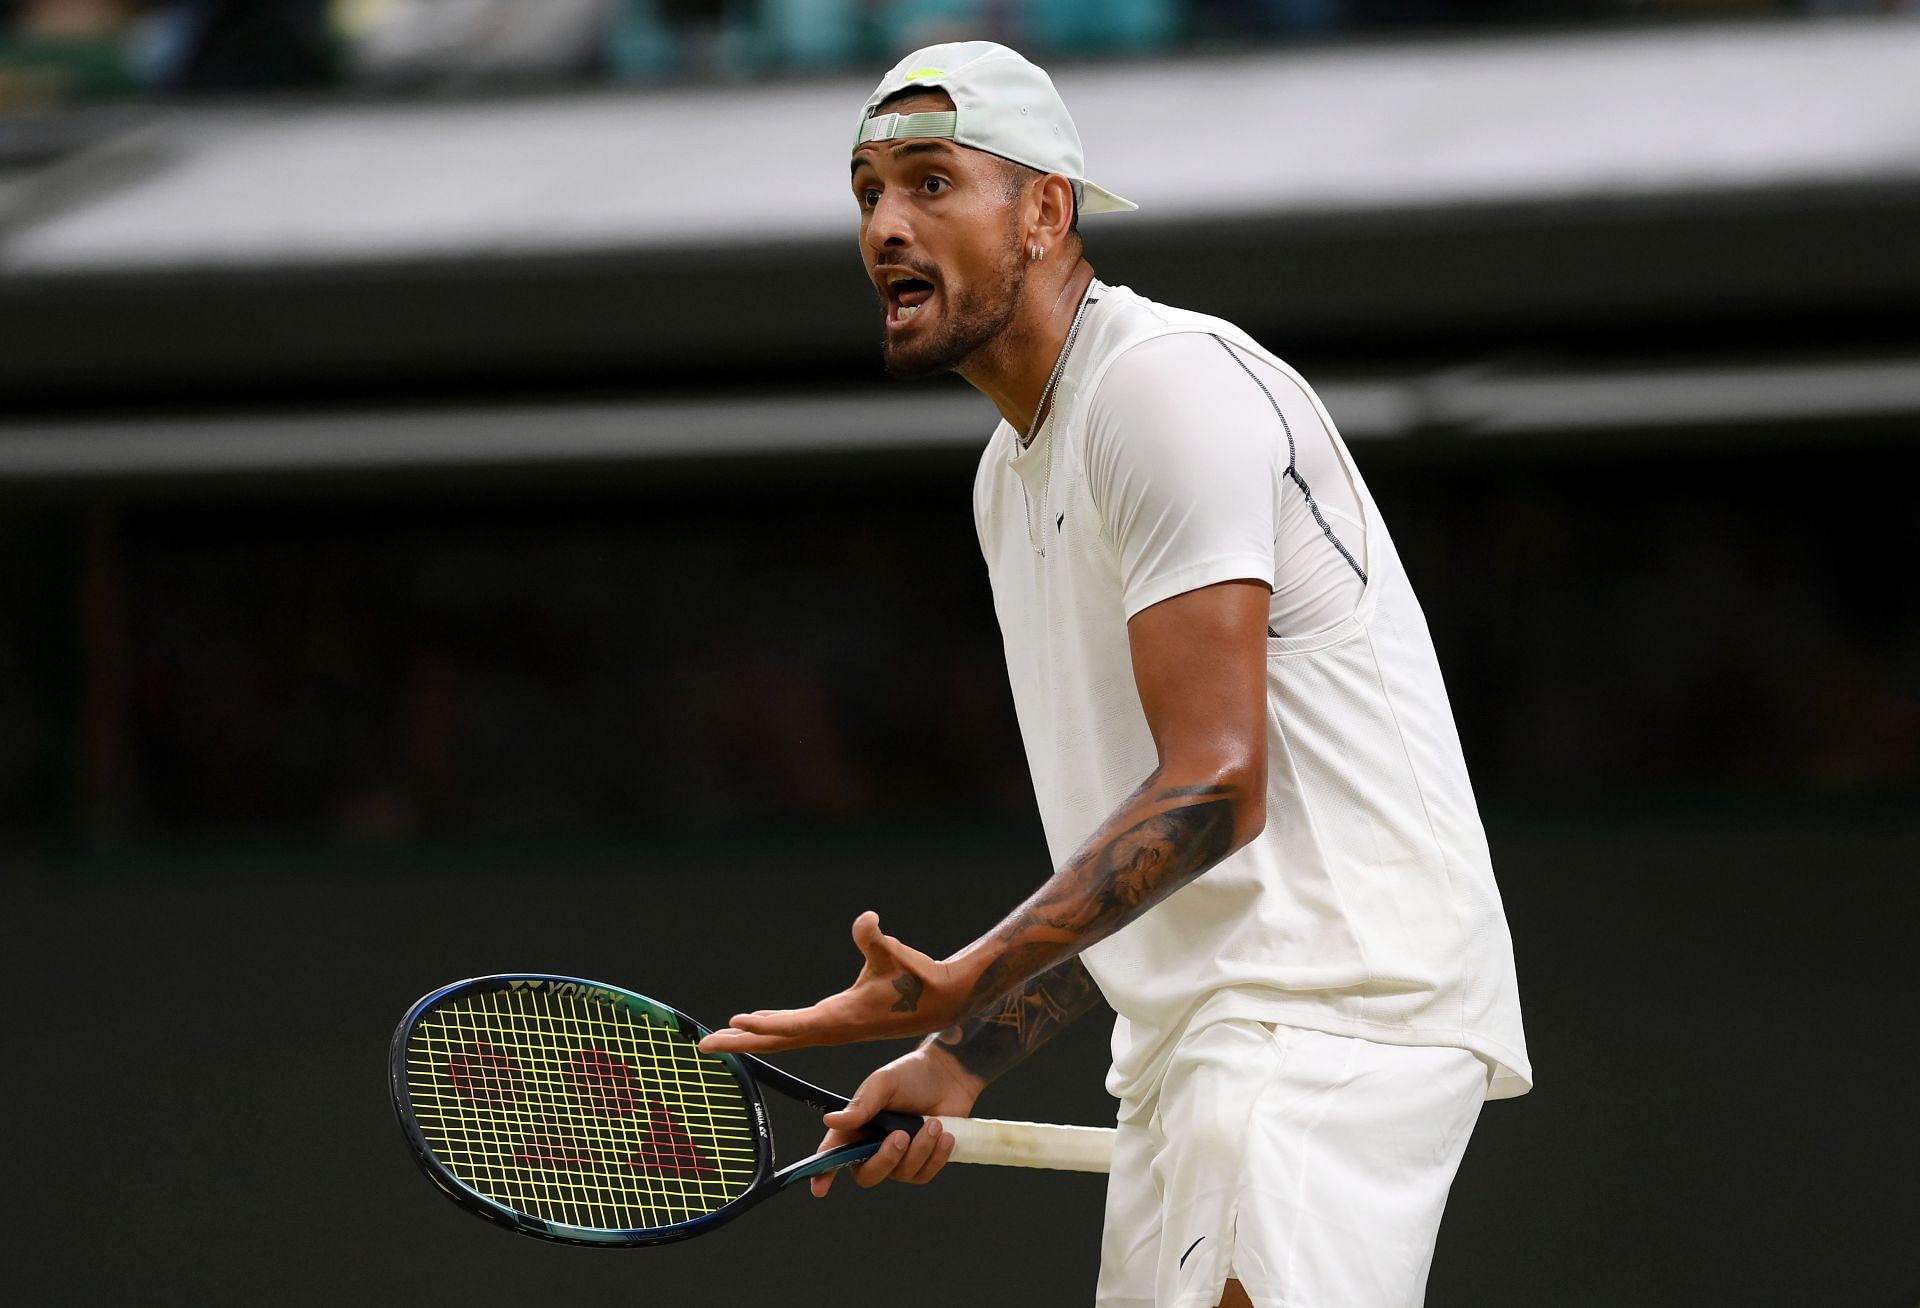 An animated Nick Kyrgios during his match against Stefanos Tsitsipas at the 2022 Wimbledon Championships